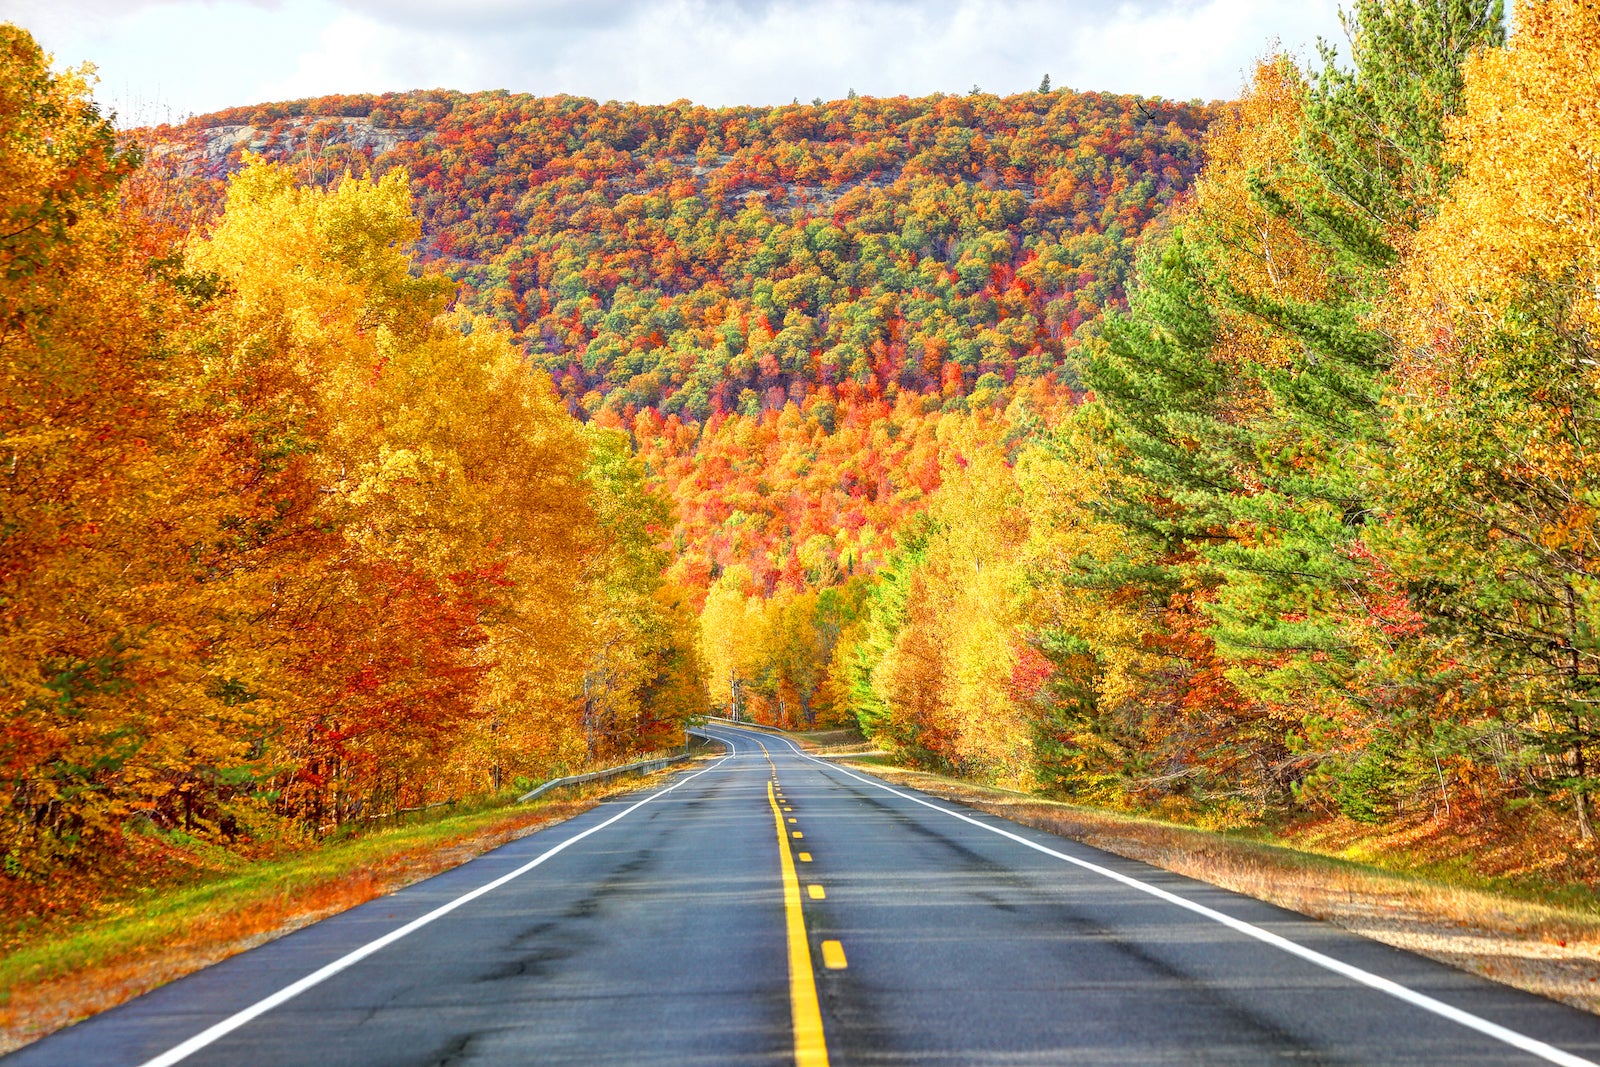 a road leads into a forest of yellow, orange, red and green trees